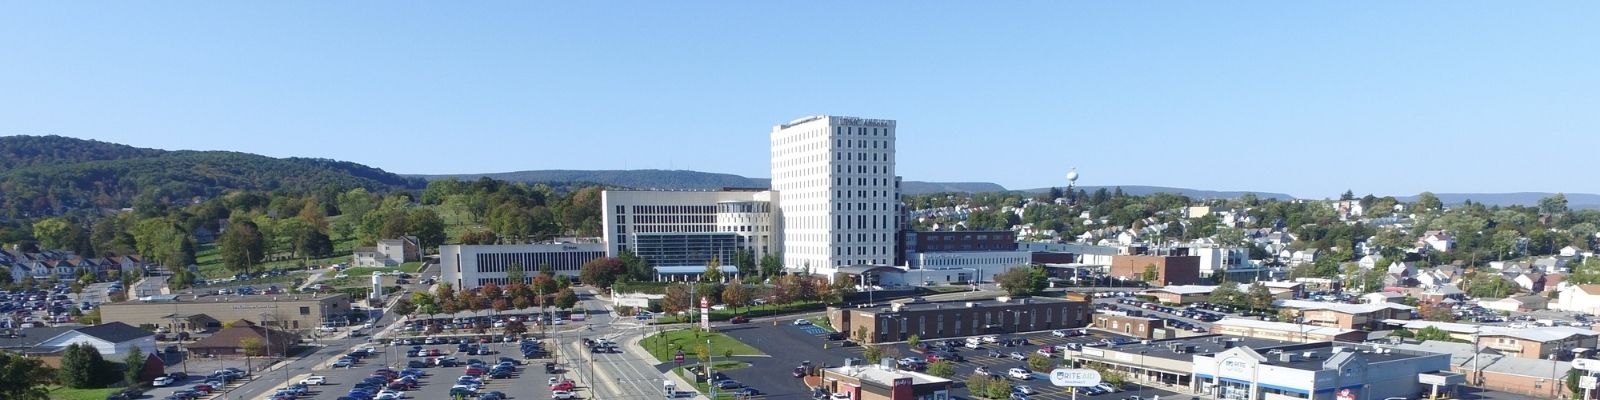 Distant view of the UPMC Altoona Hospital Campus